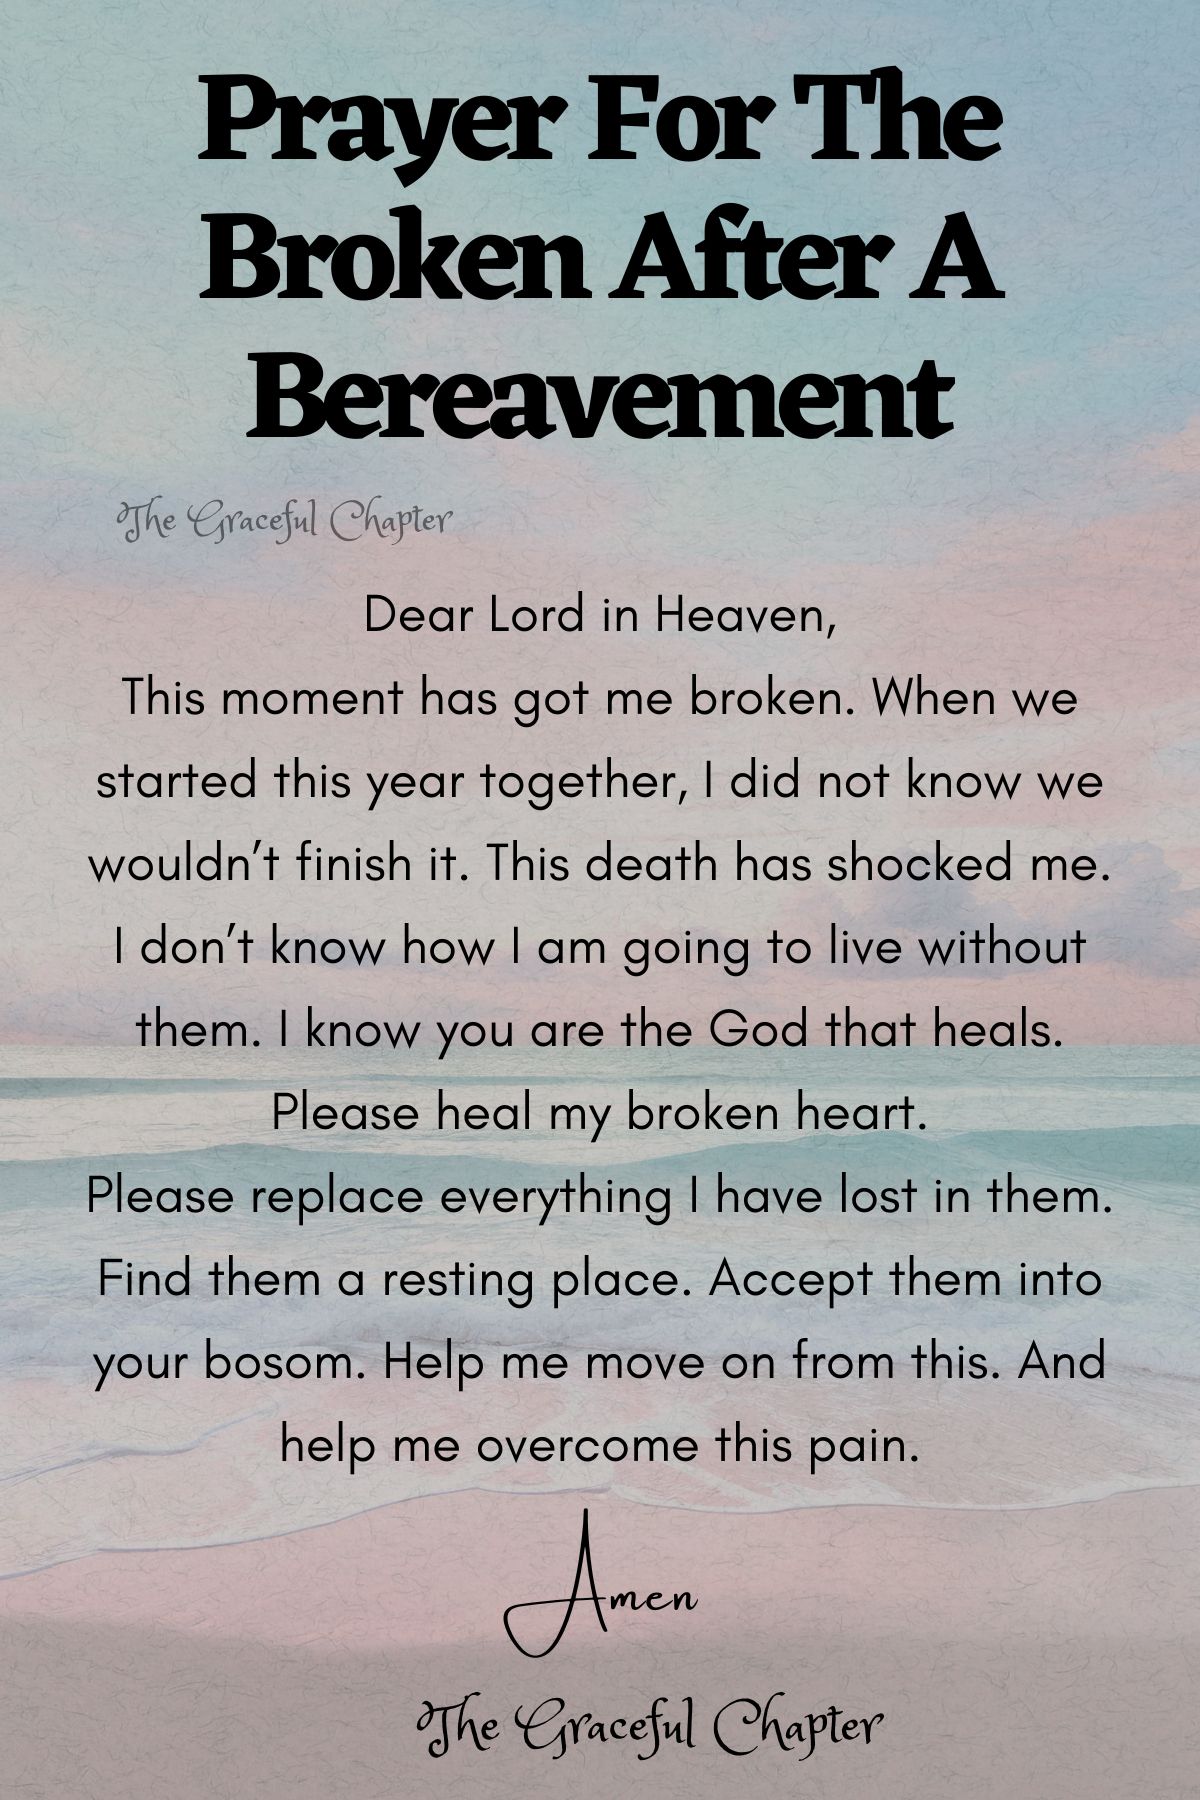 For the broken after a bereavement